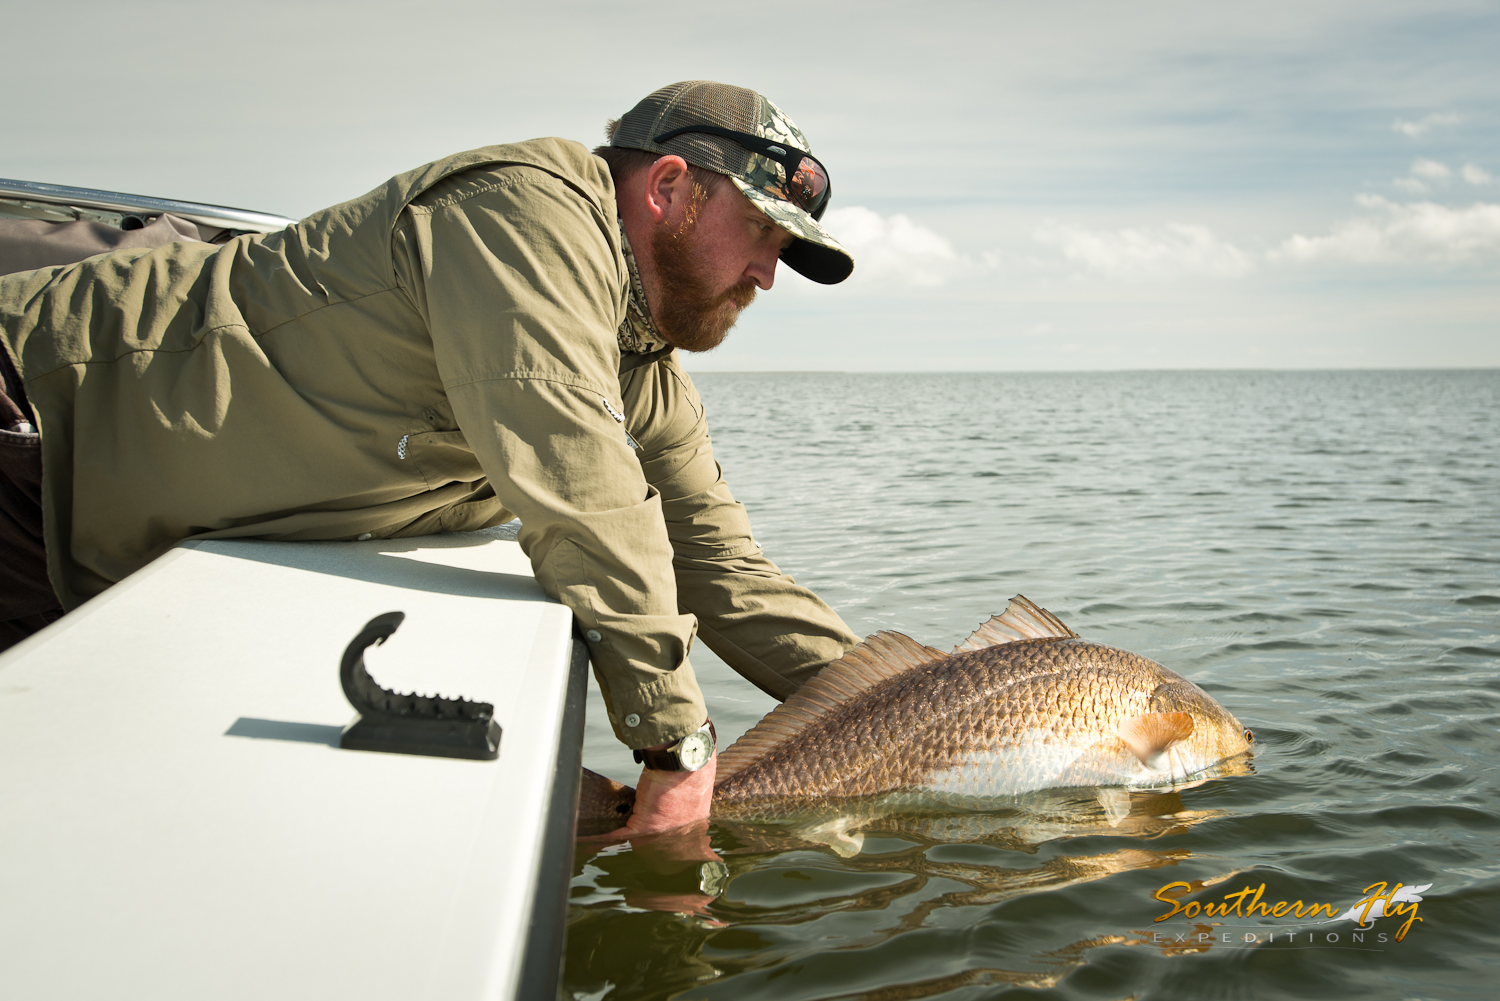 Fly fishing new orleans louisiana with Southern Fly Expeditions 